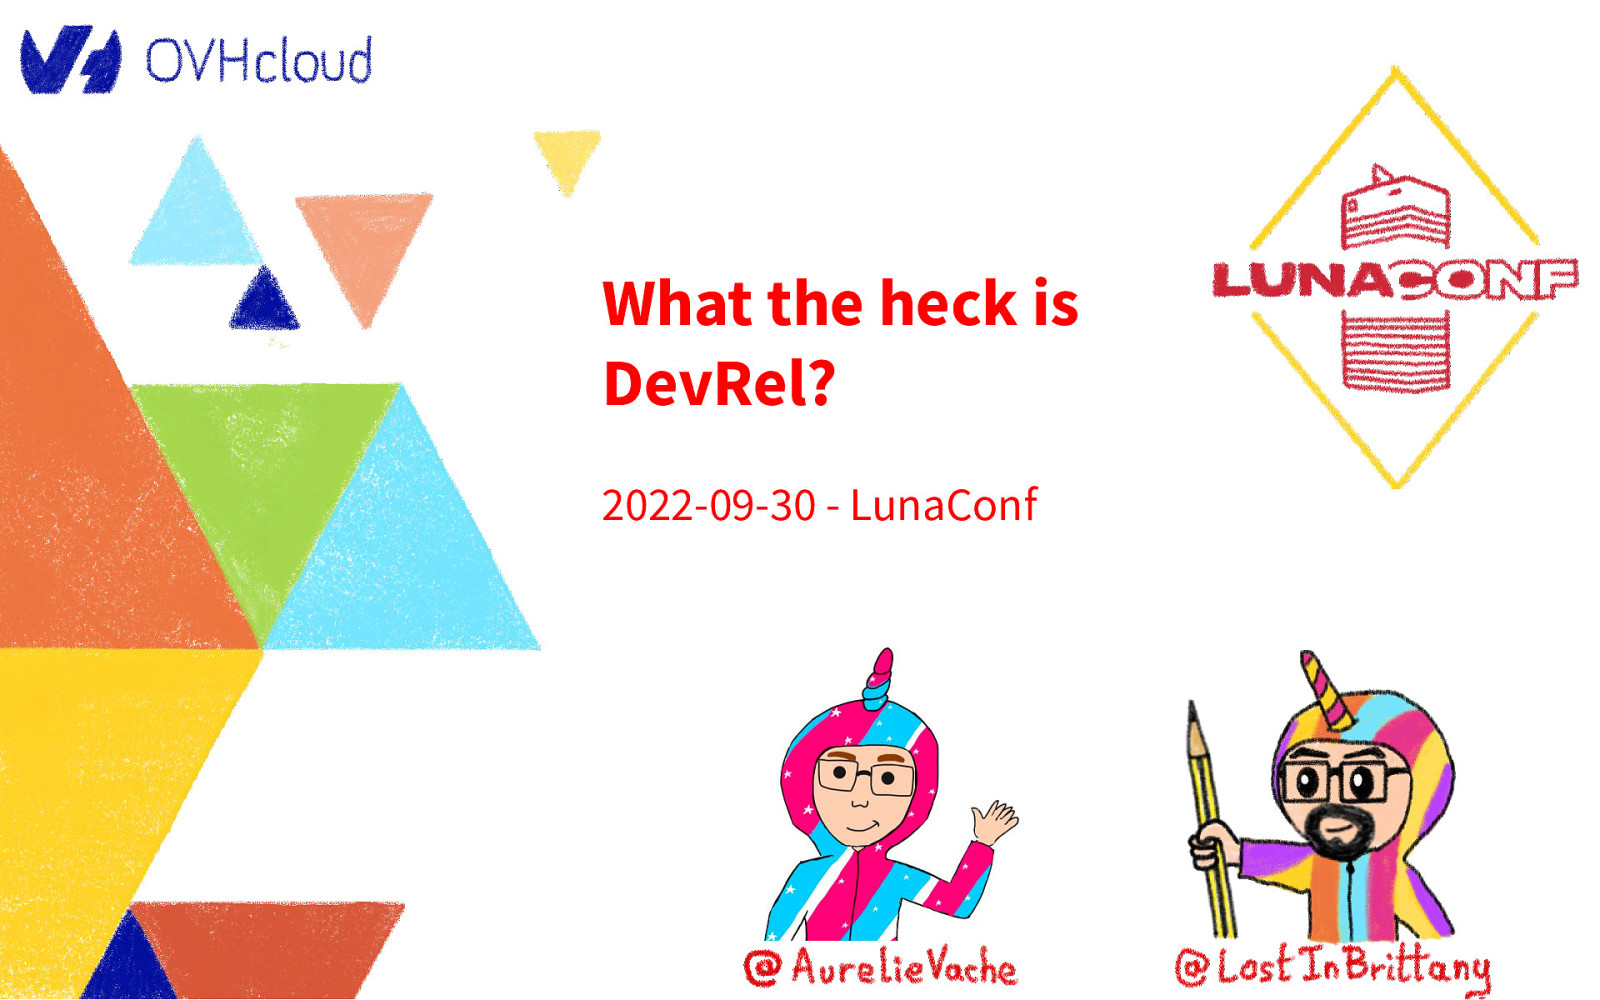 What the heck is DevRel?